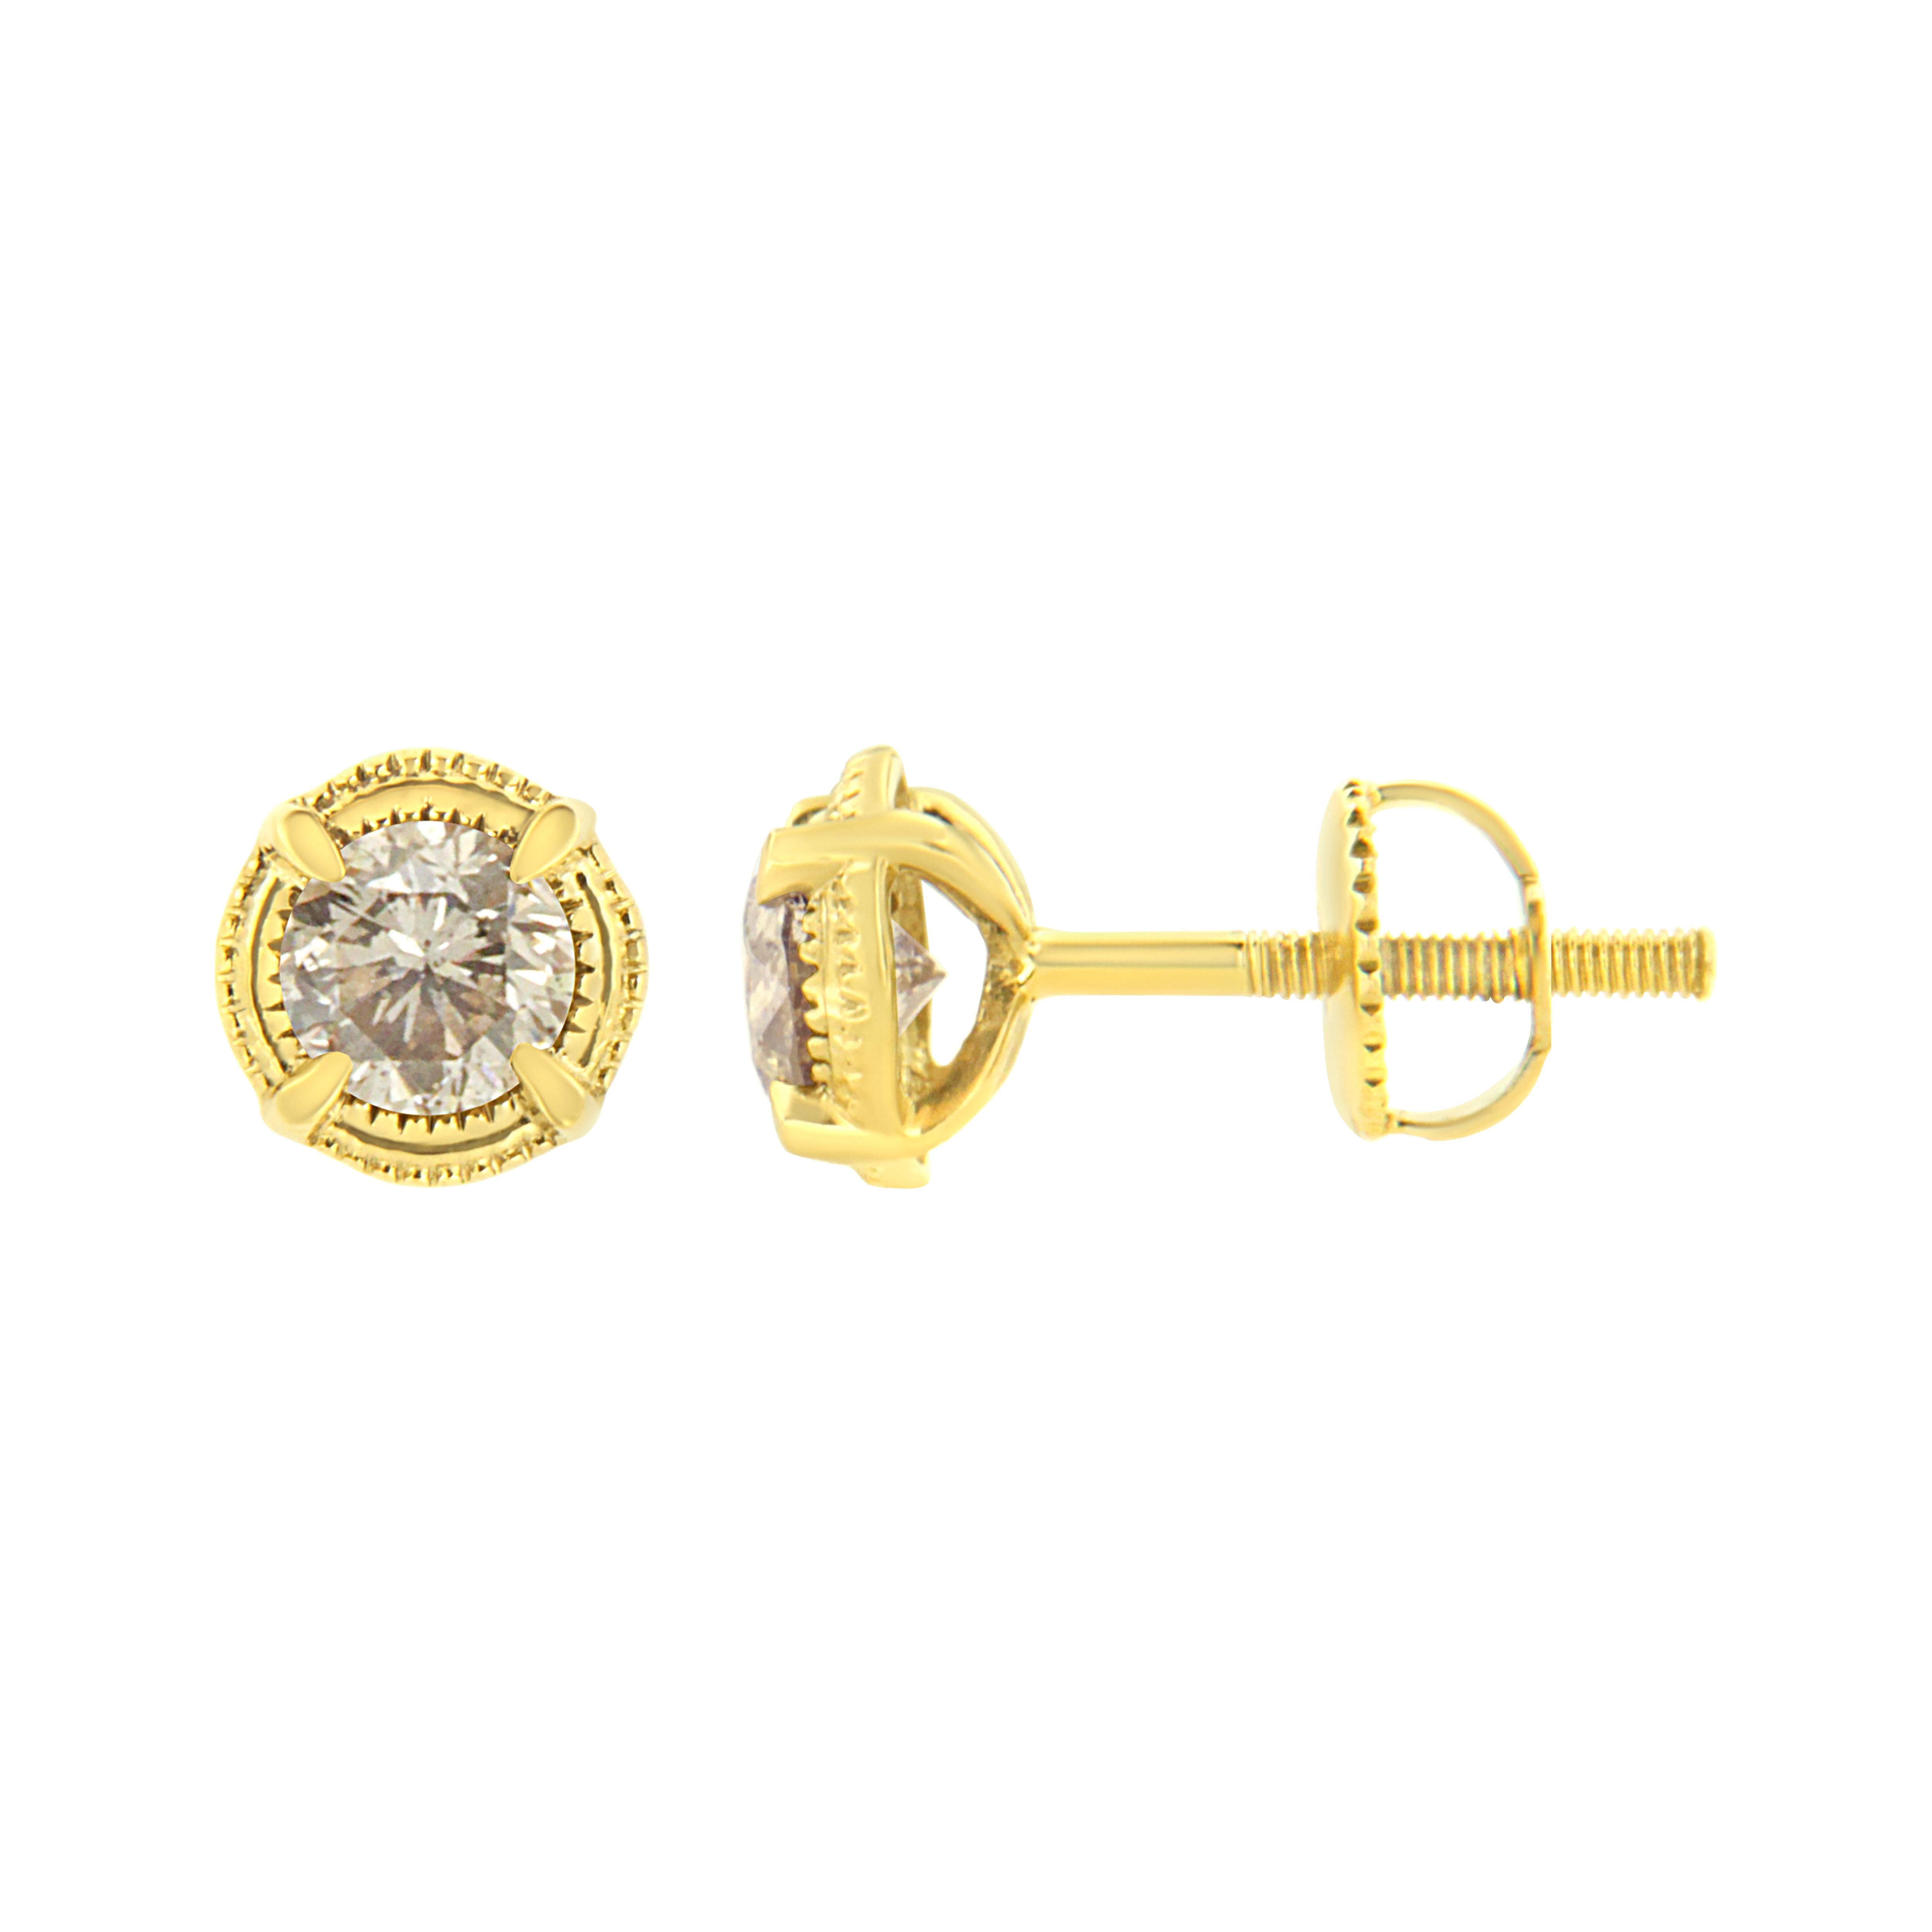 Delicate milgrain texture traces the edge of these stunning earrings crafted of genuine 14k Yellow gold plated .925 sterling silver. Diamonds are set at the center of the 4-prong design of each of these round stud earrings, for 0.33 carat of